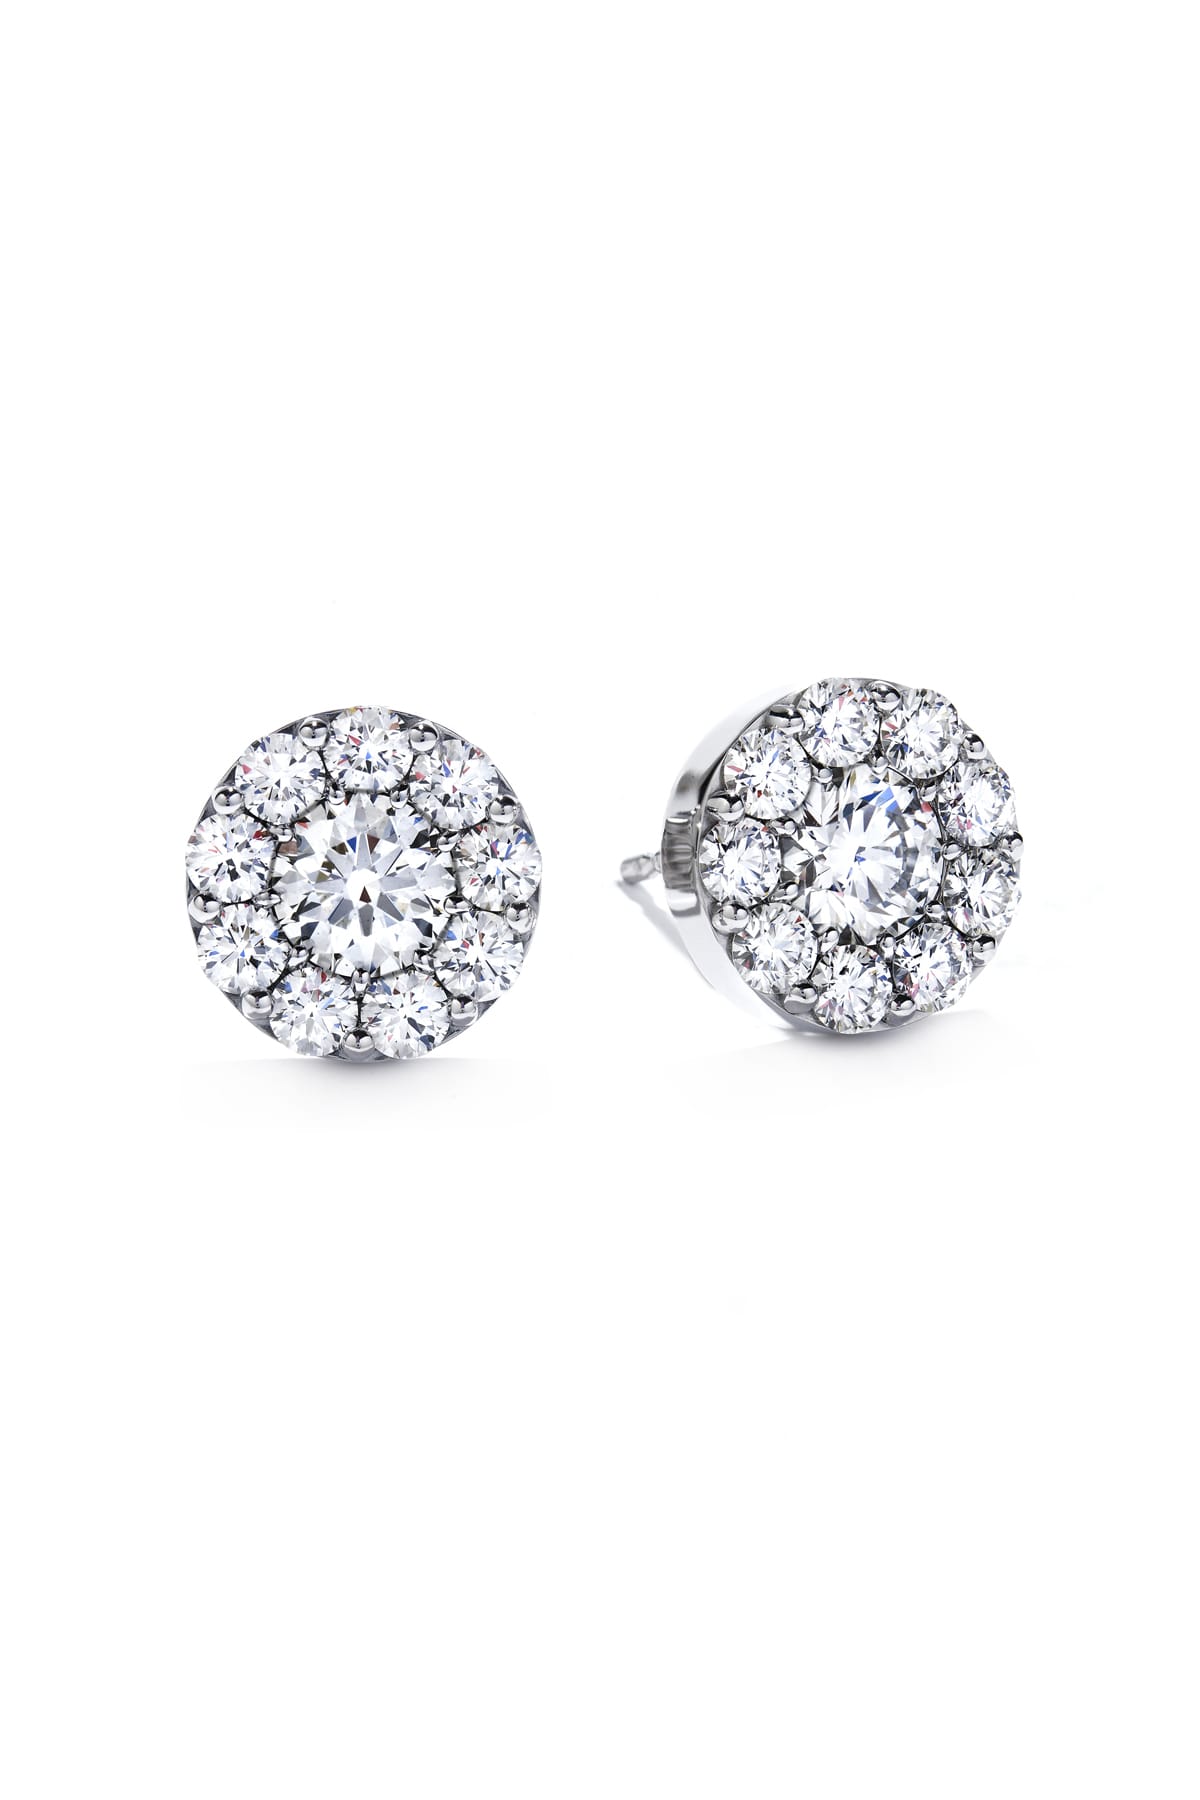 18 Carat White Gold Fulfillment Diamond Stud Earrings From Hearts On Fire available at LeGassick Diamonds and Jewellery Gold Coast, Australia.